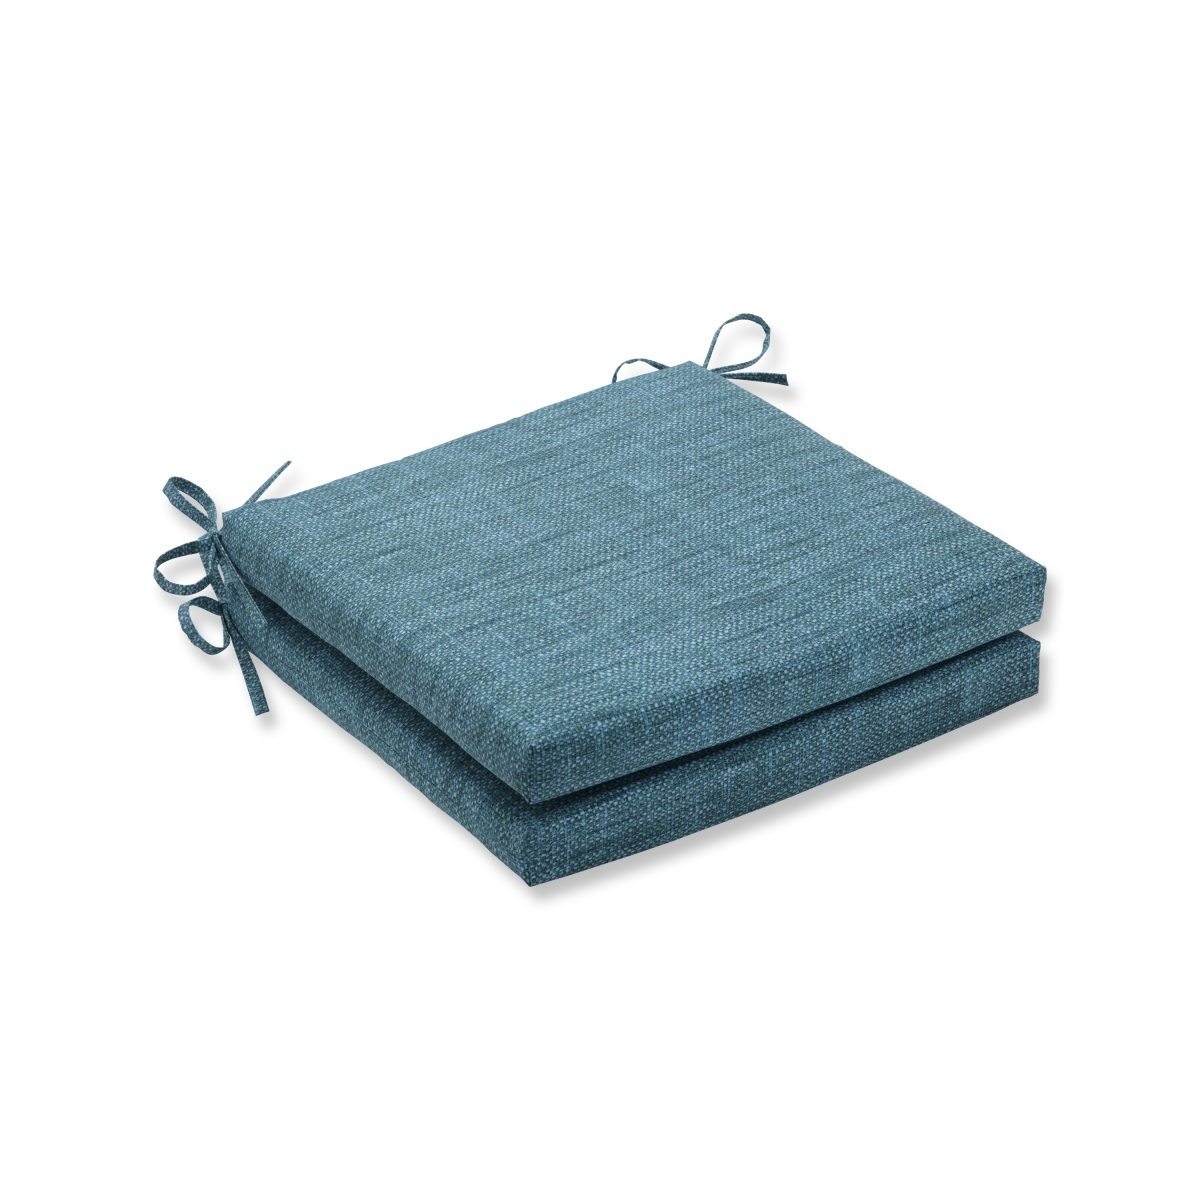 20 X 20 X 3 In. Outdoor & Indoor Remi Lagoon Squared Corners Seat Cushion, Blue - Set Of 2